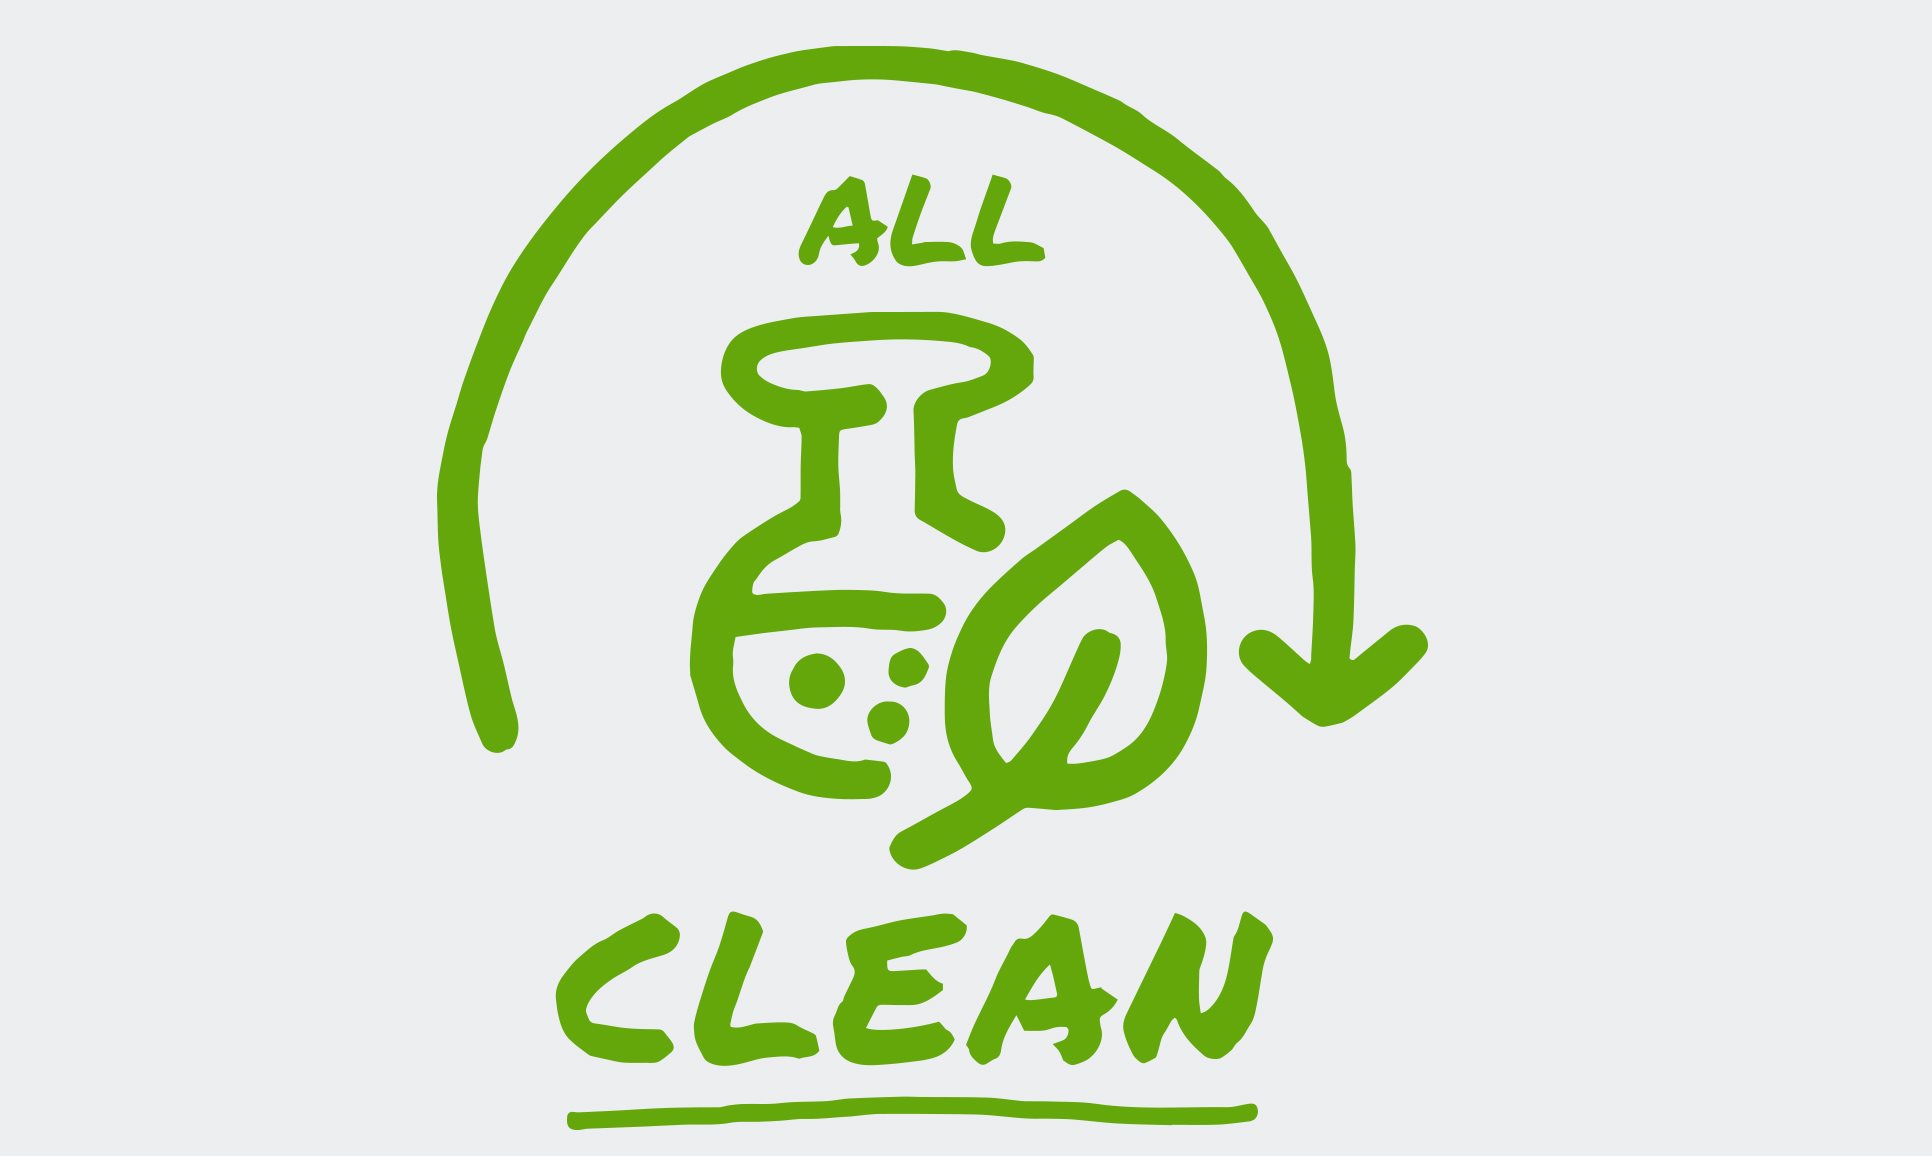 An illustrated icon shows an arrow that forms a semi-circle around the words “All Clean”, appearing alongside a leaf and beaker.